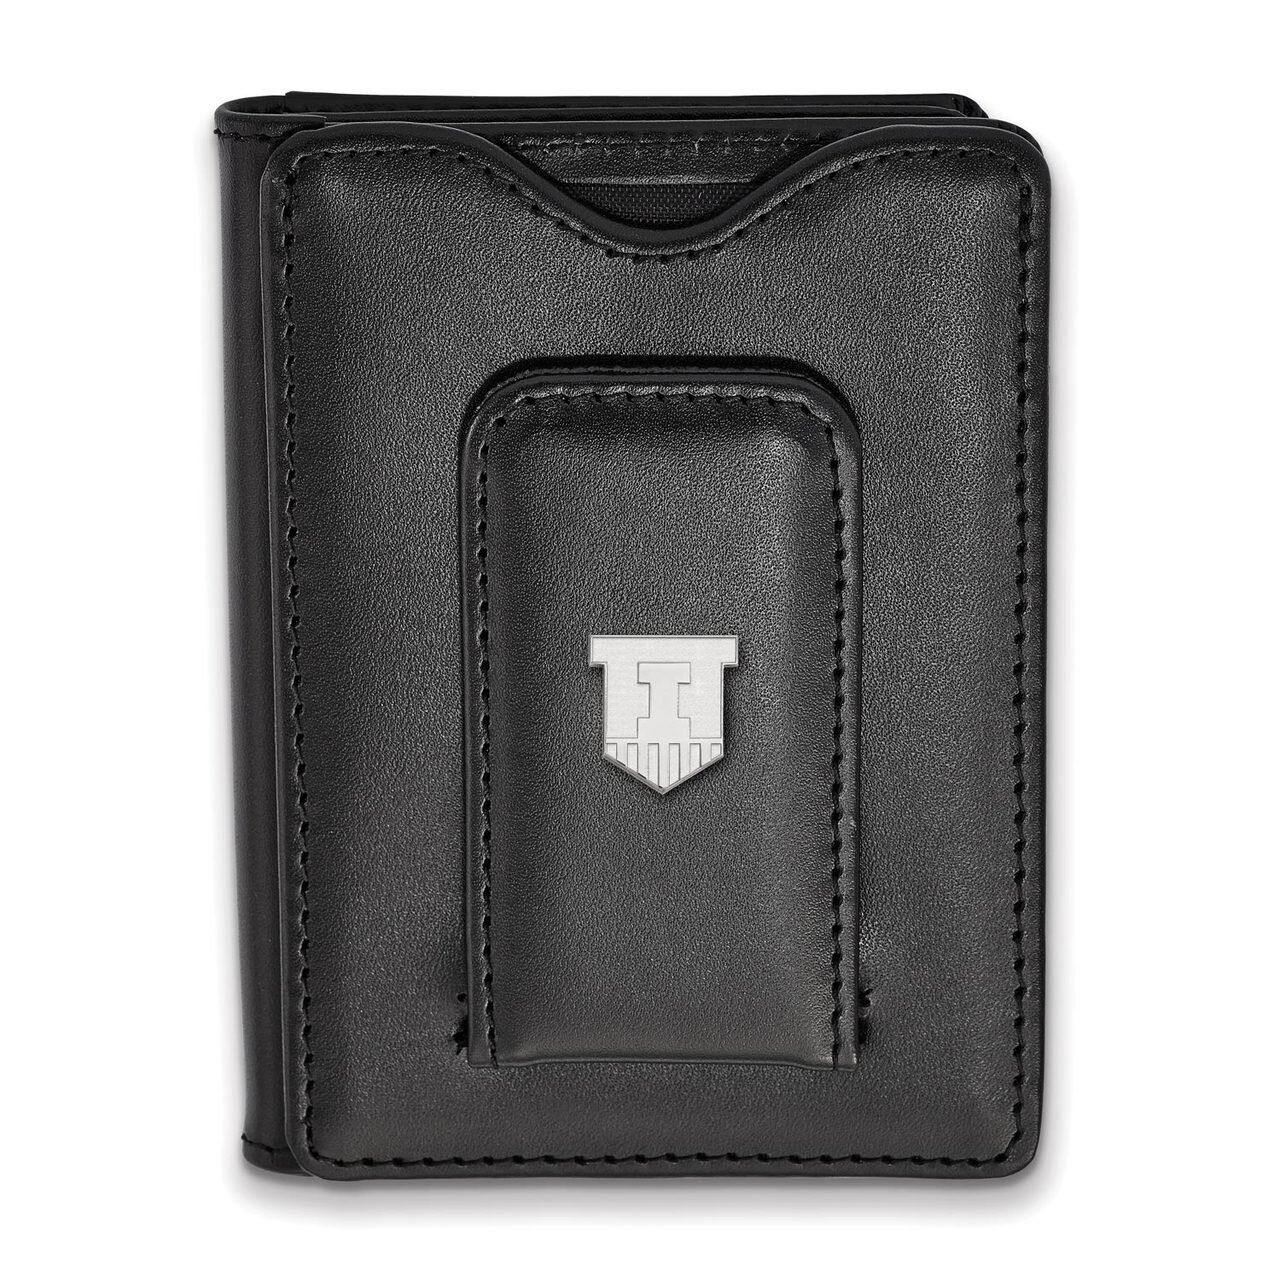 University of Illinois Black Leather Wallet SS053UIL-W1